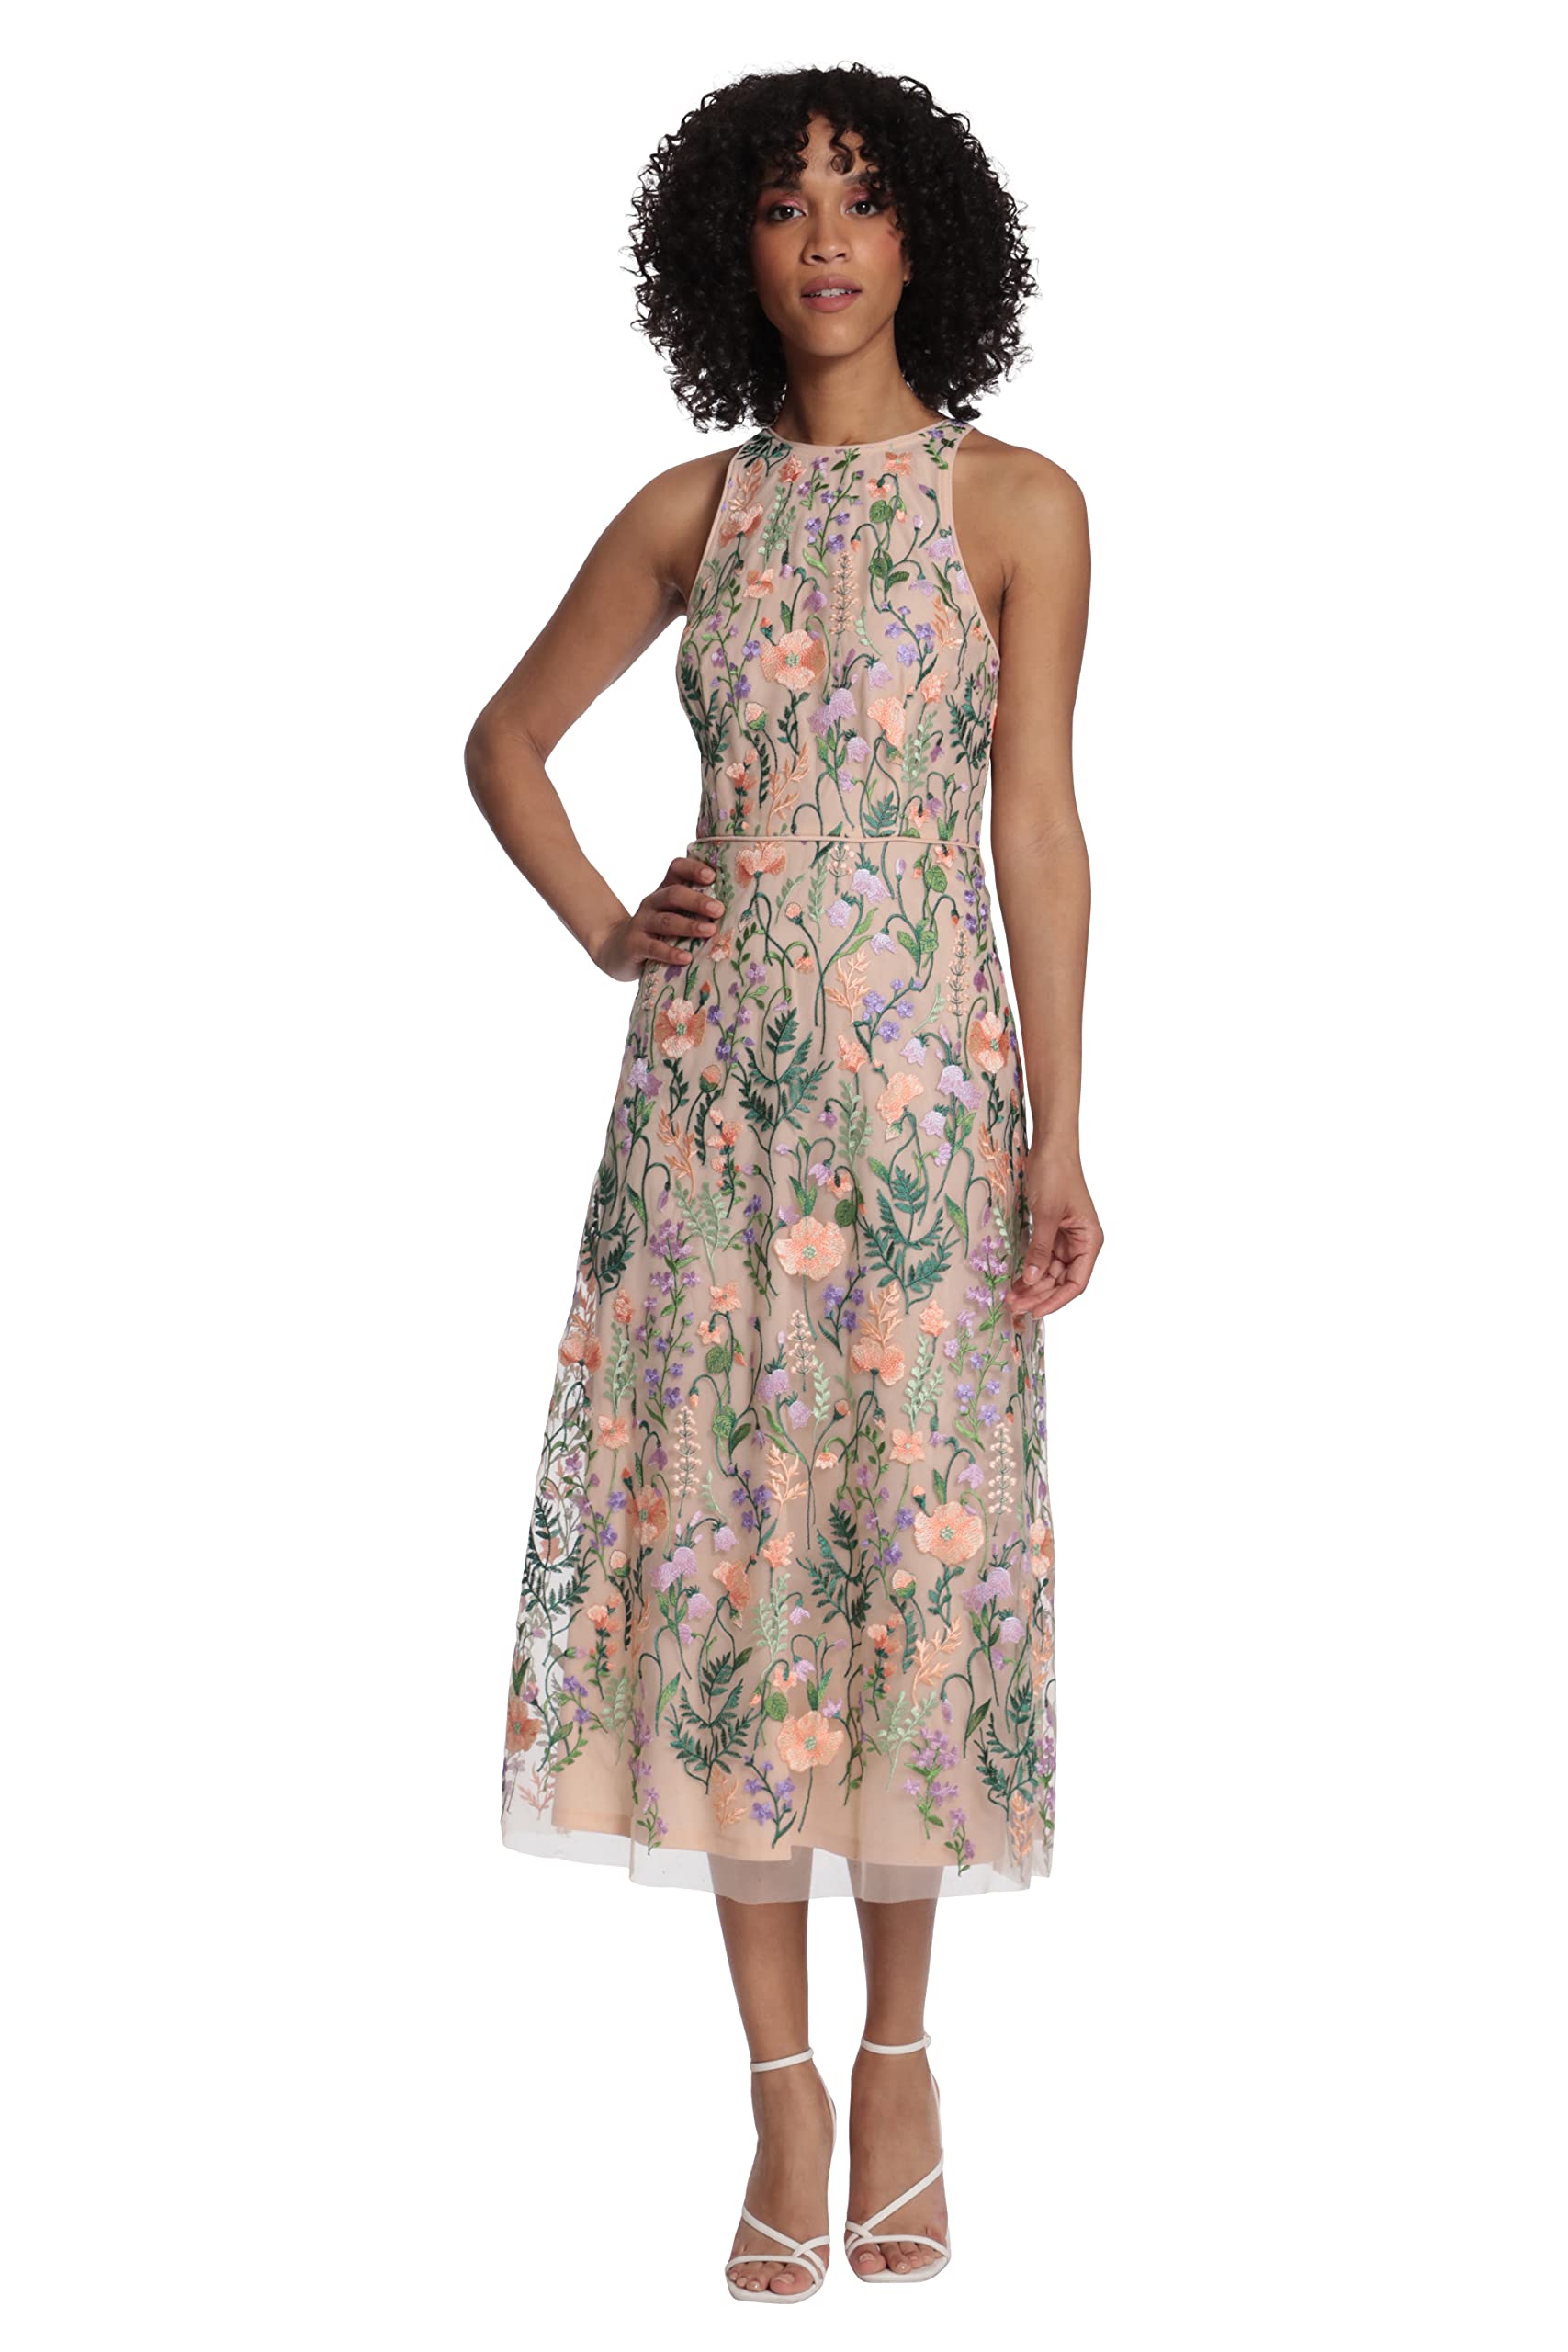 Maggy London Women's Floral Embroidered Halter Midi Dress with Back V-Neck